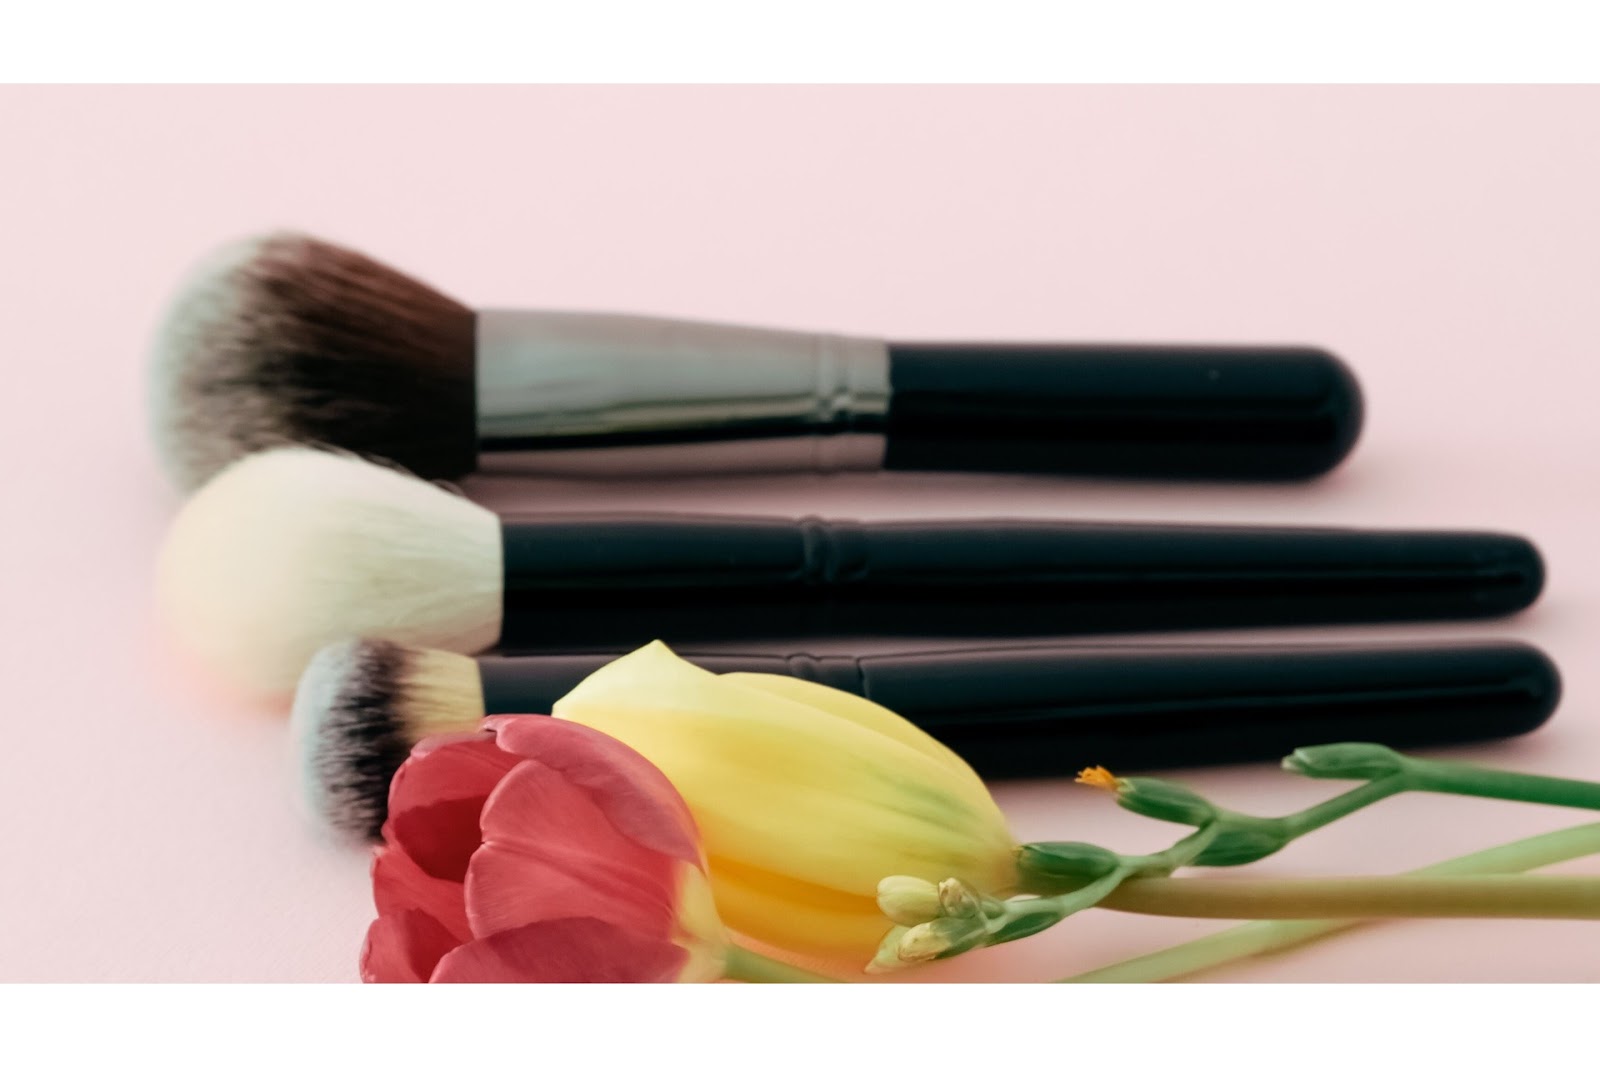 Foundation brushes with two flowers